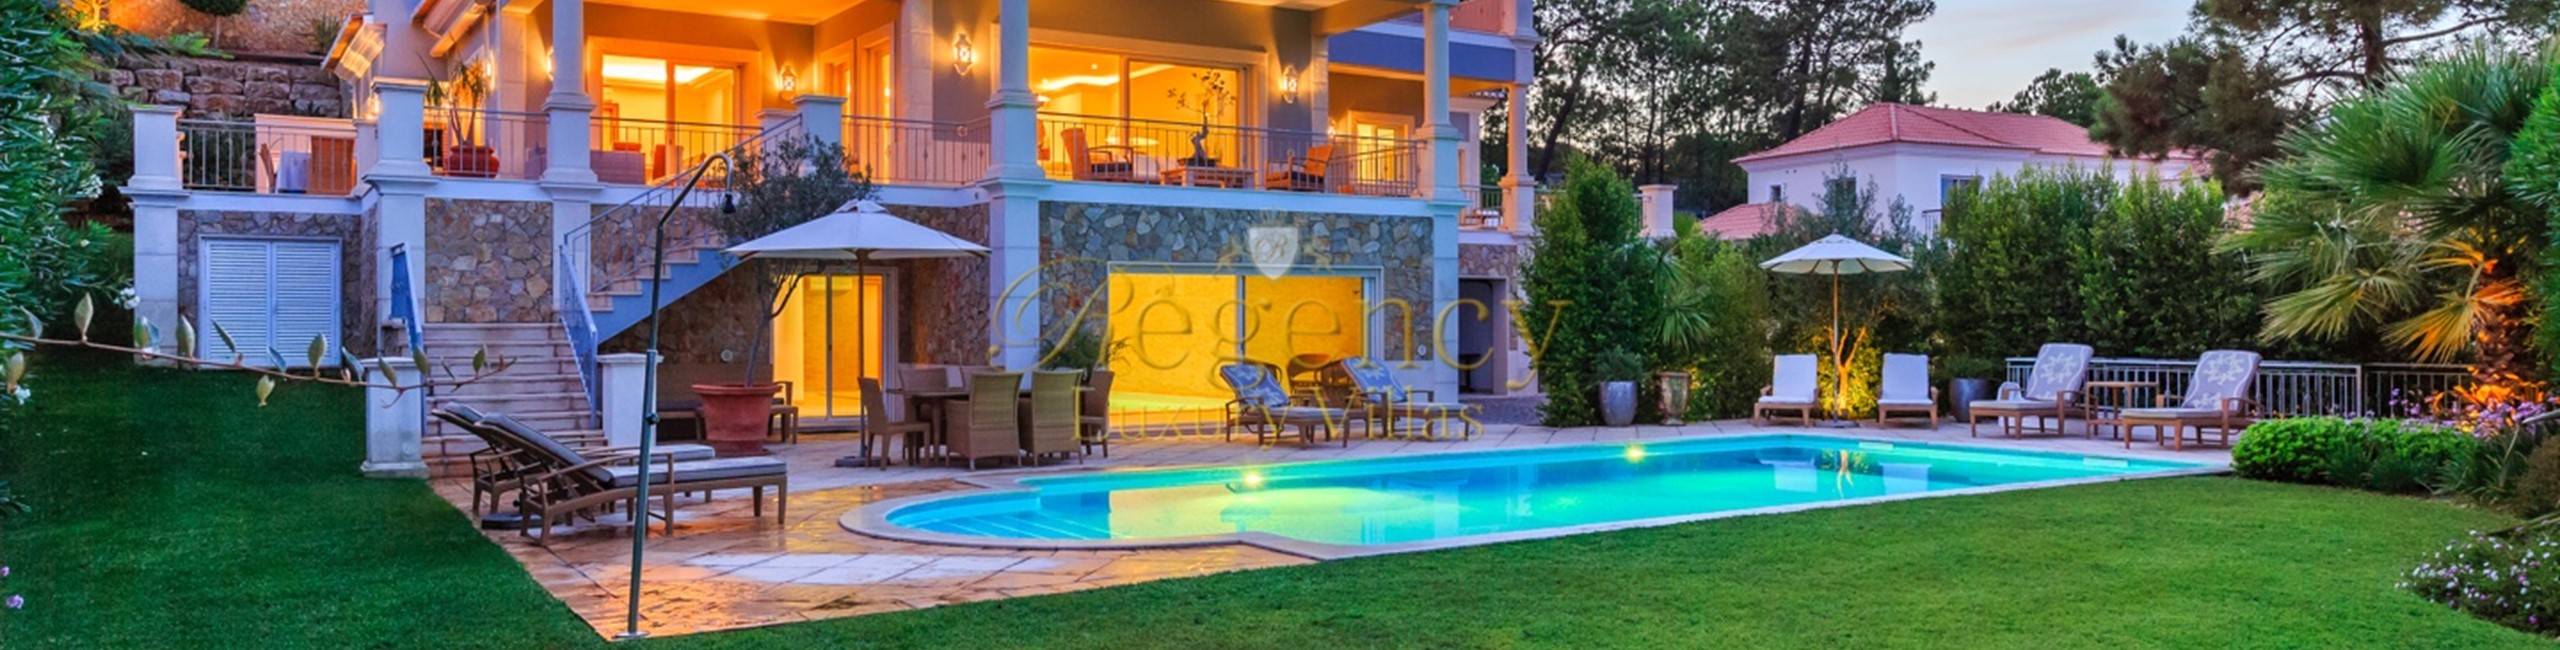 Villa To Rent In Quinta Do Lago 6 Bedroom Property With Gym